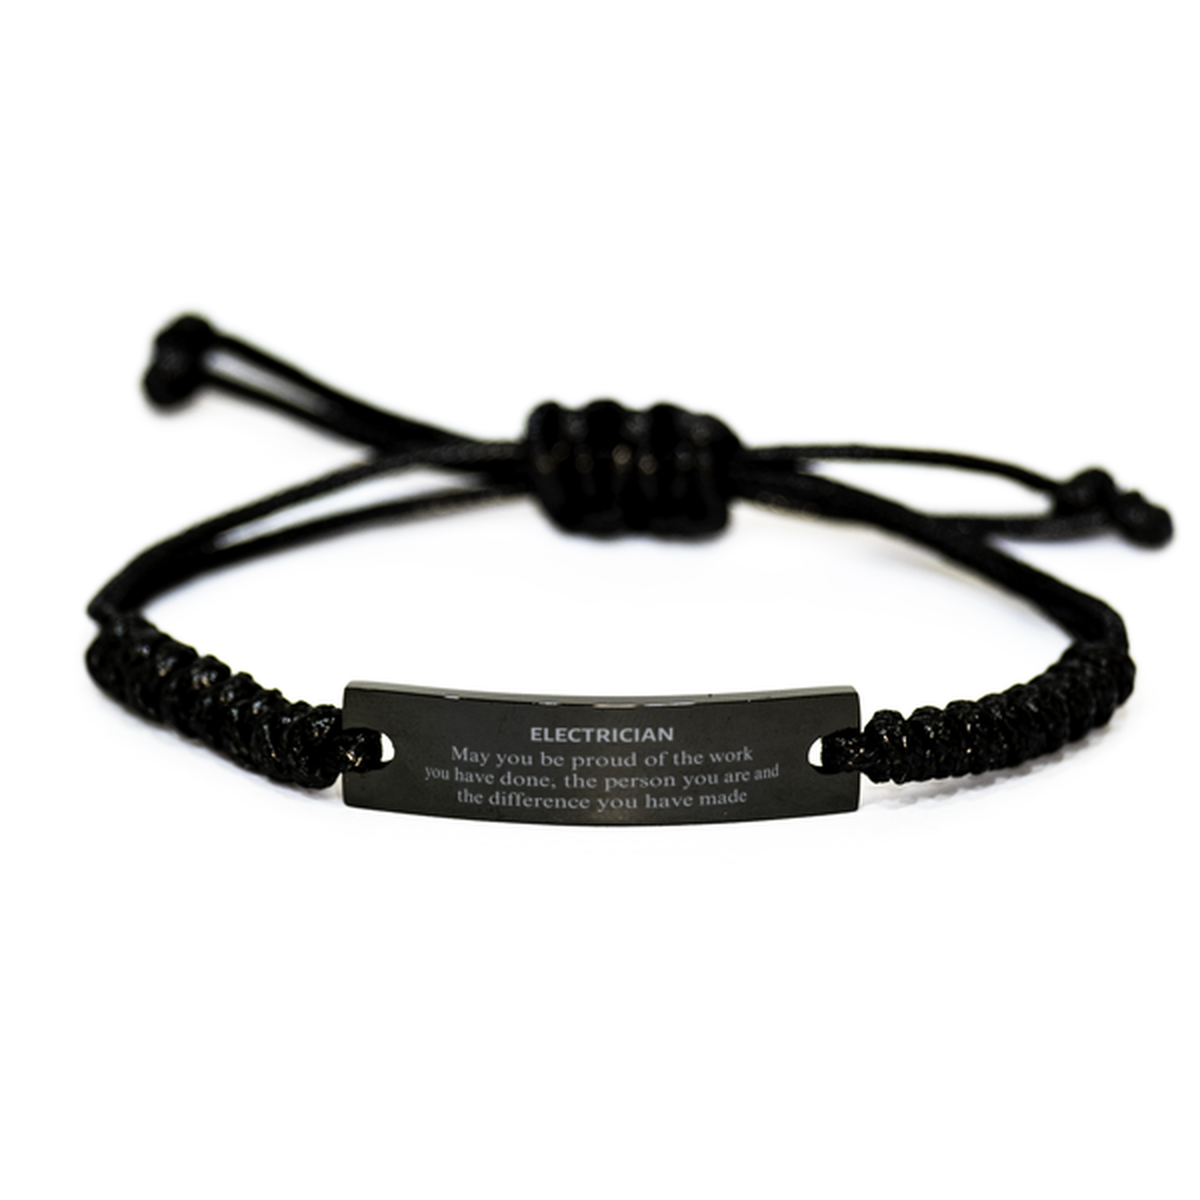 Electrician May you be proud of the work you have done, Retirement Electrician Black Rope Bracelet for Colleague Appreciation Gifts Amazing for Electrician